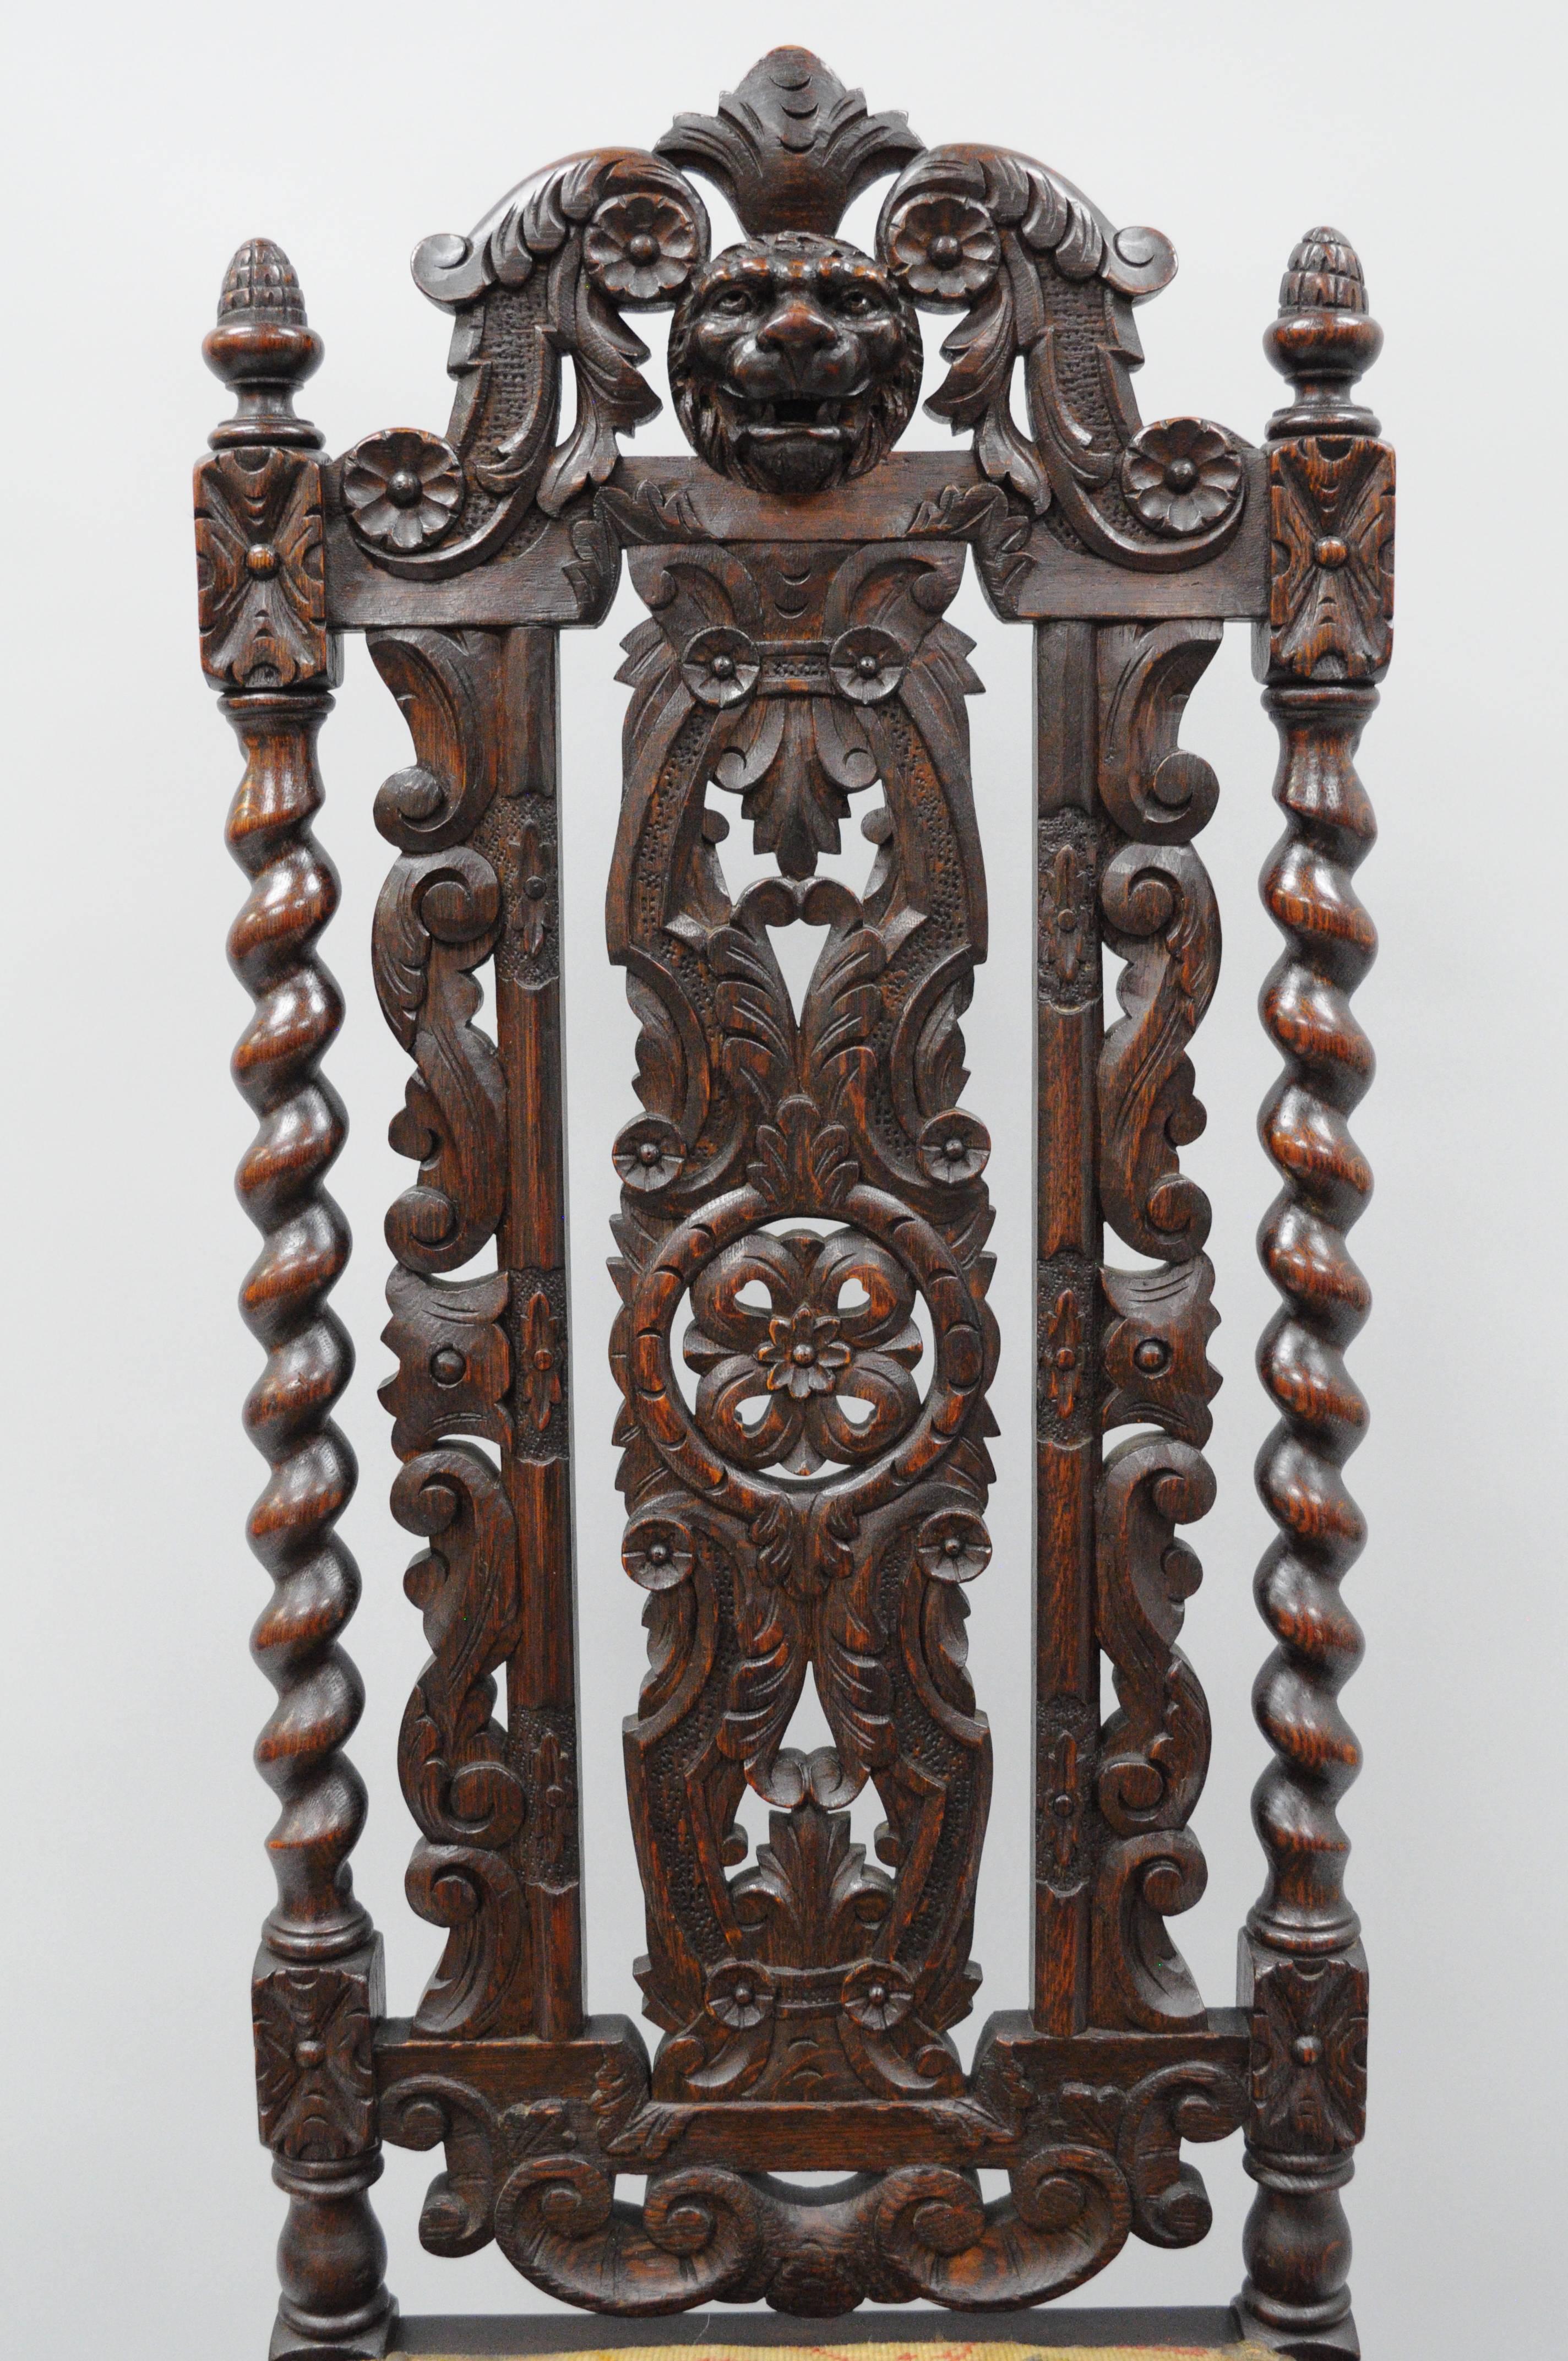 Pair of antique Renaissance Revival figural lion carved oak barley twist high back throne chairs. Item features a finely carved solid oakwood frame, including a carved lion head crest, acorn finials, daisy and acanthus leaf carvings, pierce carved